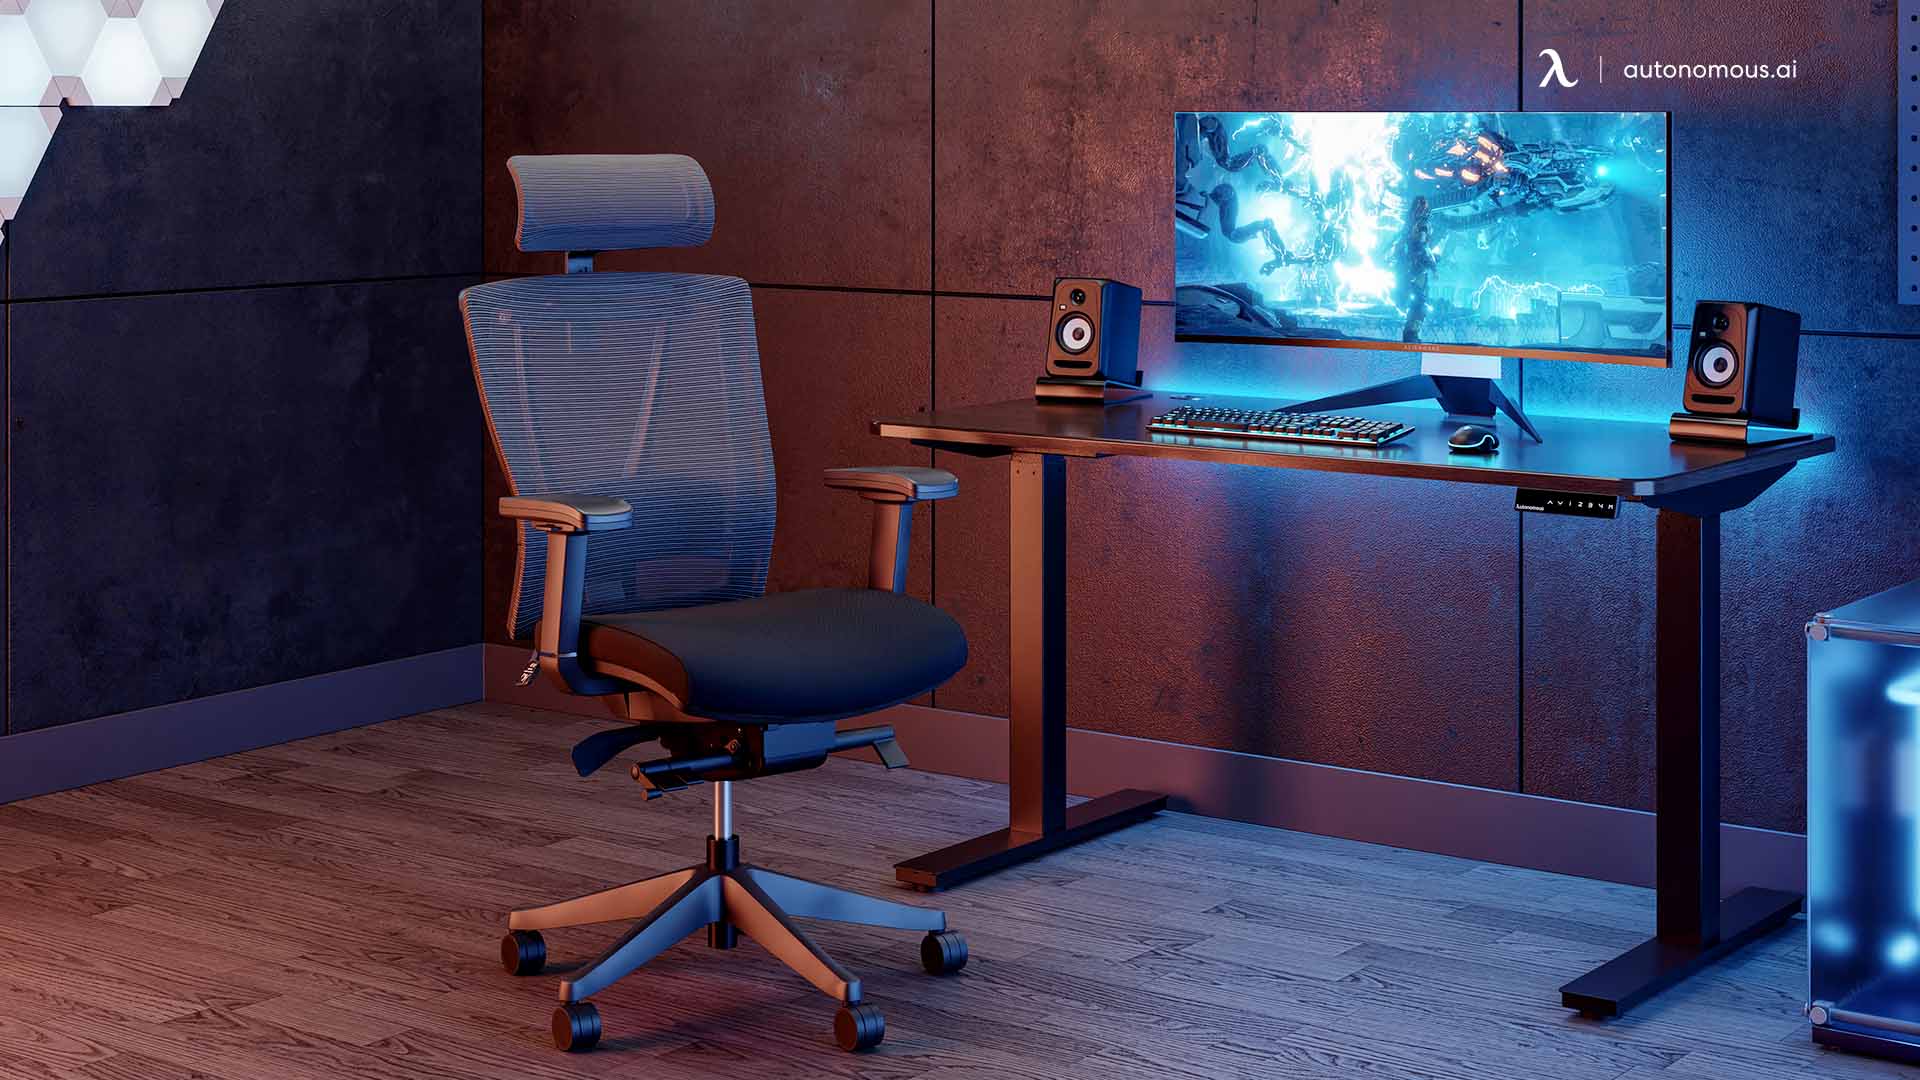 SmartDesk Core gaming chair and table